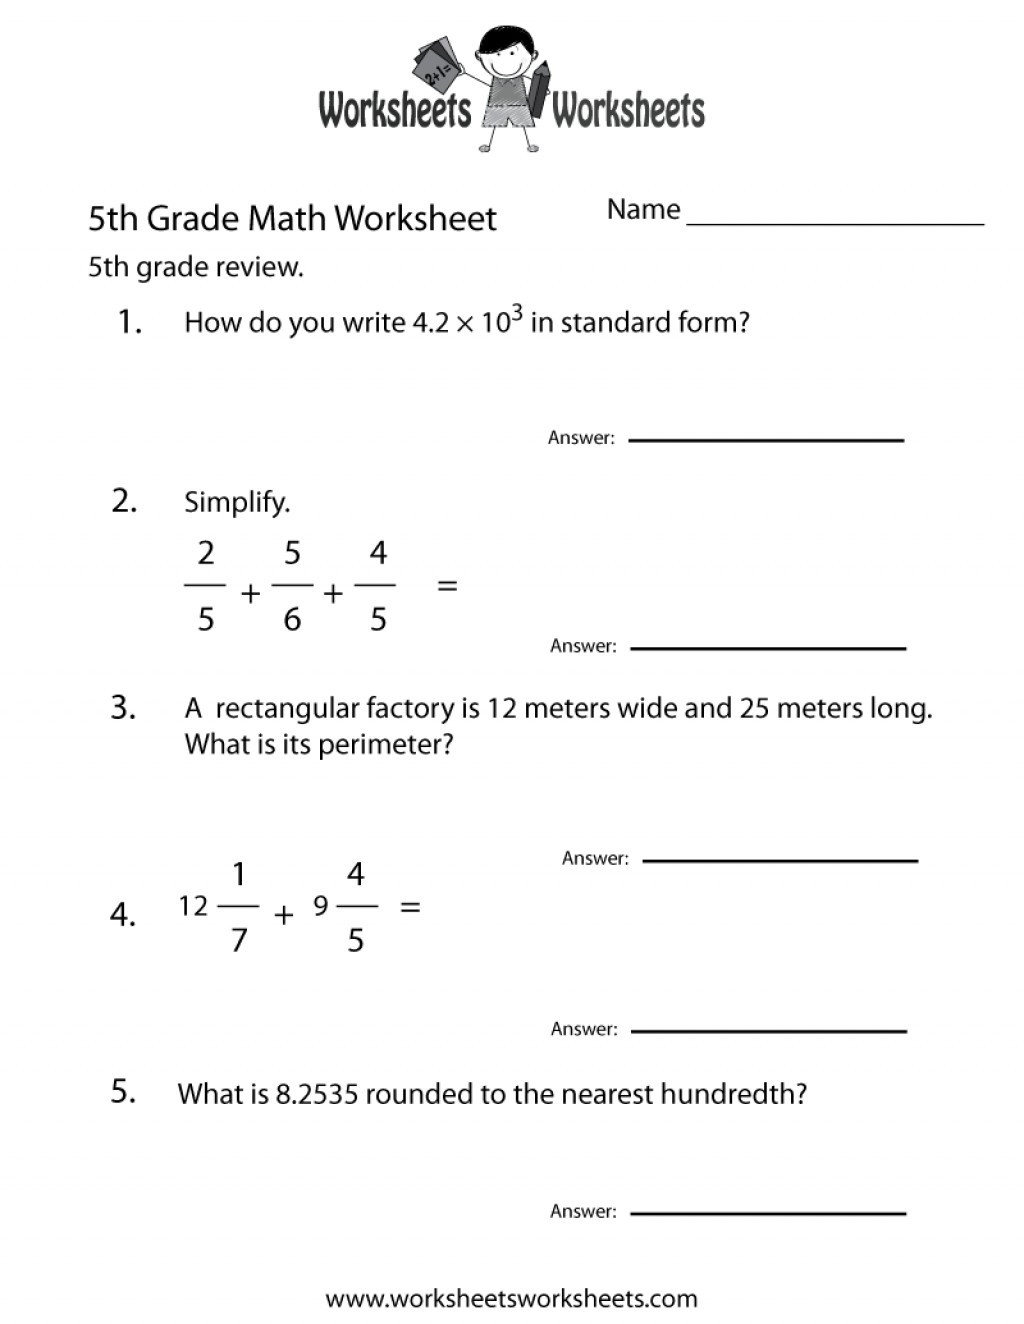 Probability Worksheet 5th Grade theoretical Probability Worksheet 7th Grade